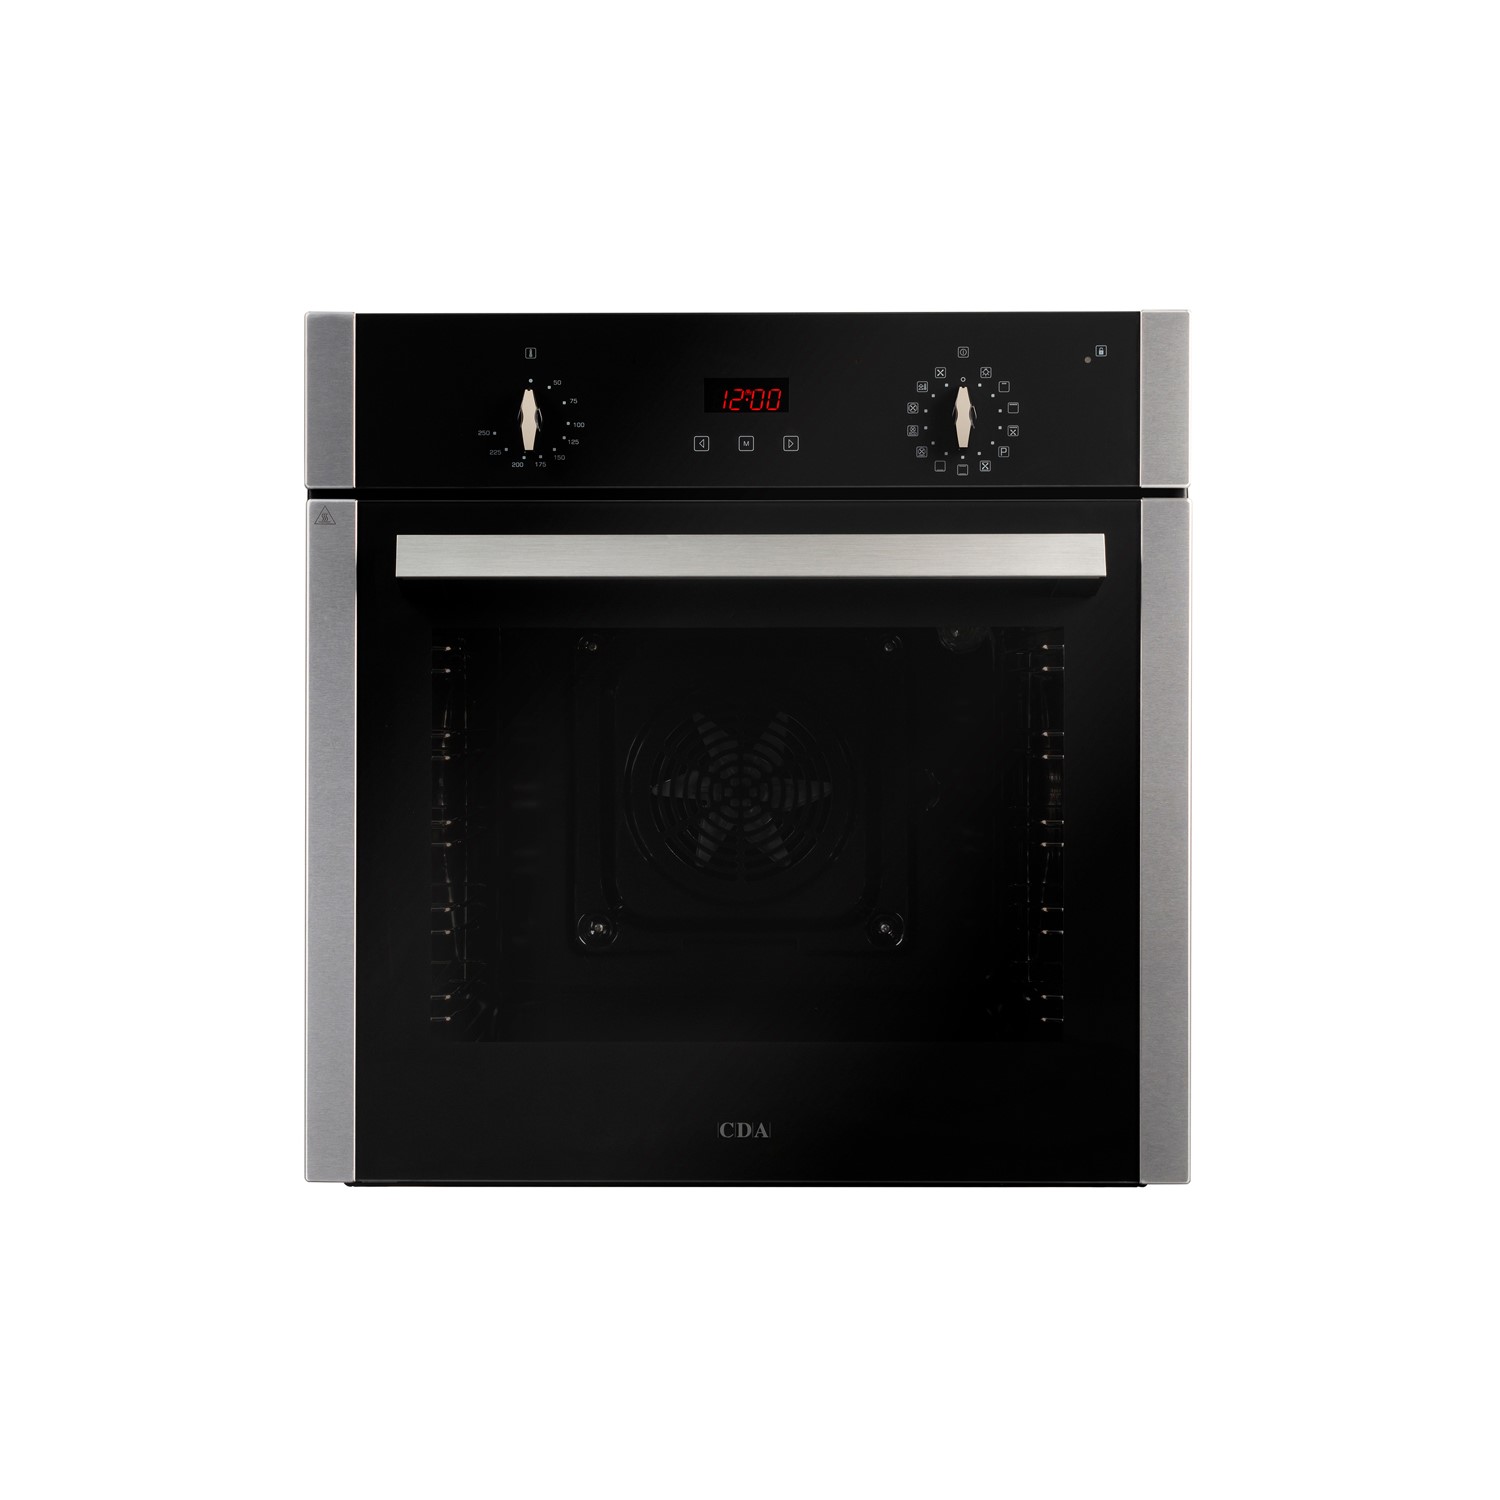 Photos - Other for Computer CDA Electric Single Oven - Stainless Steel SC360SS 